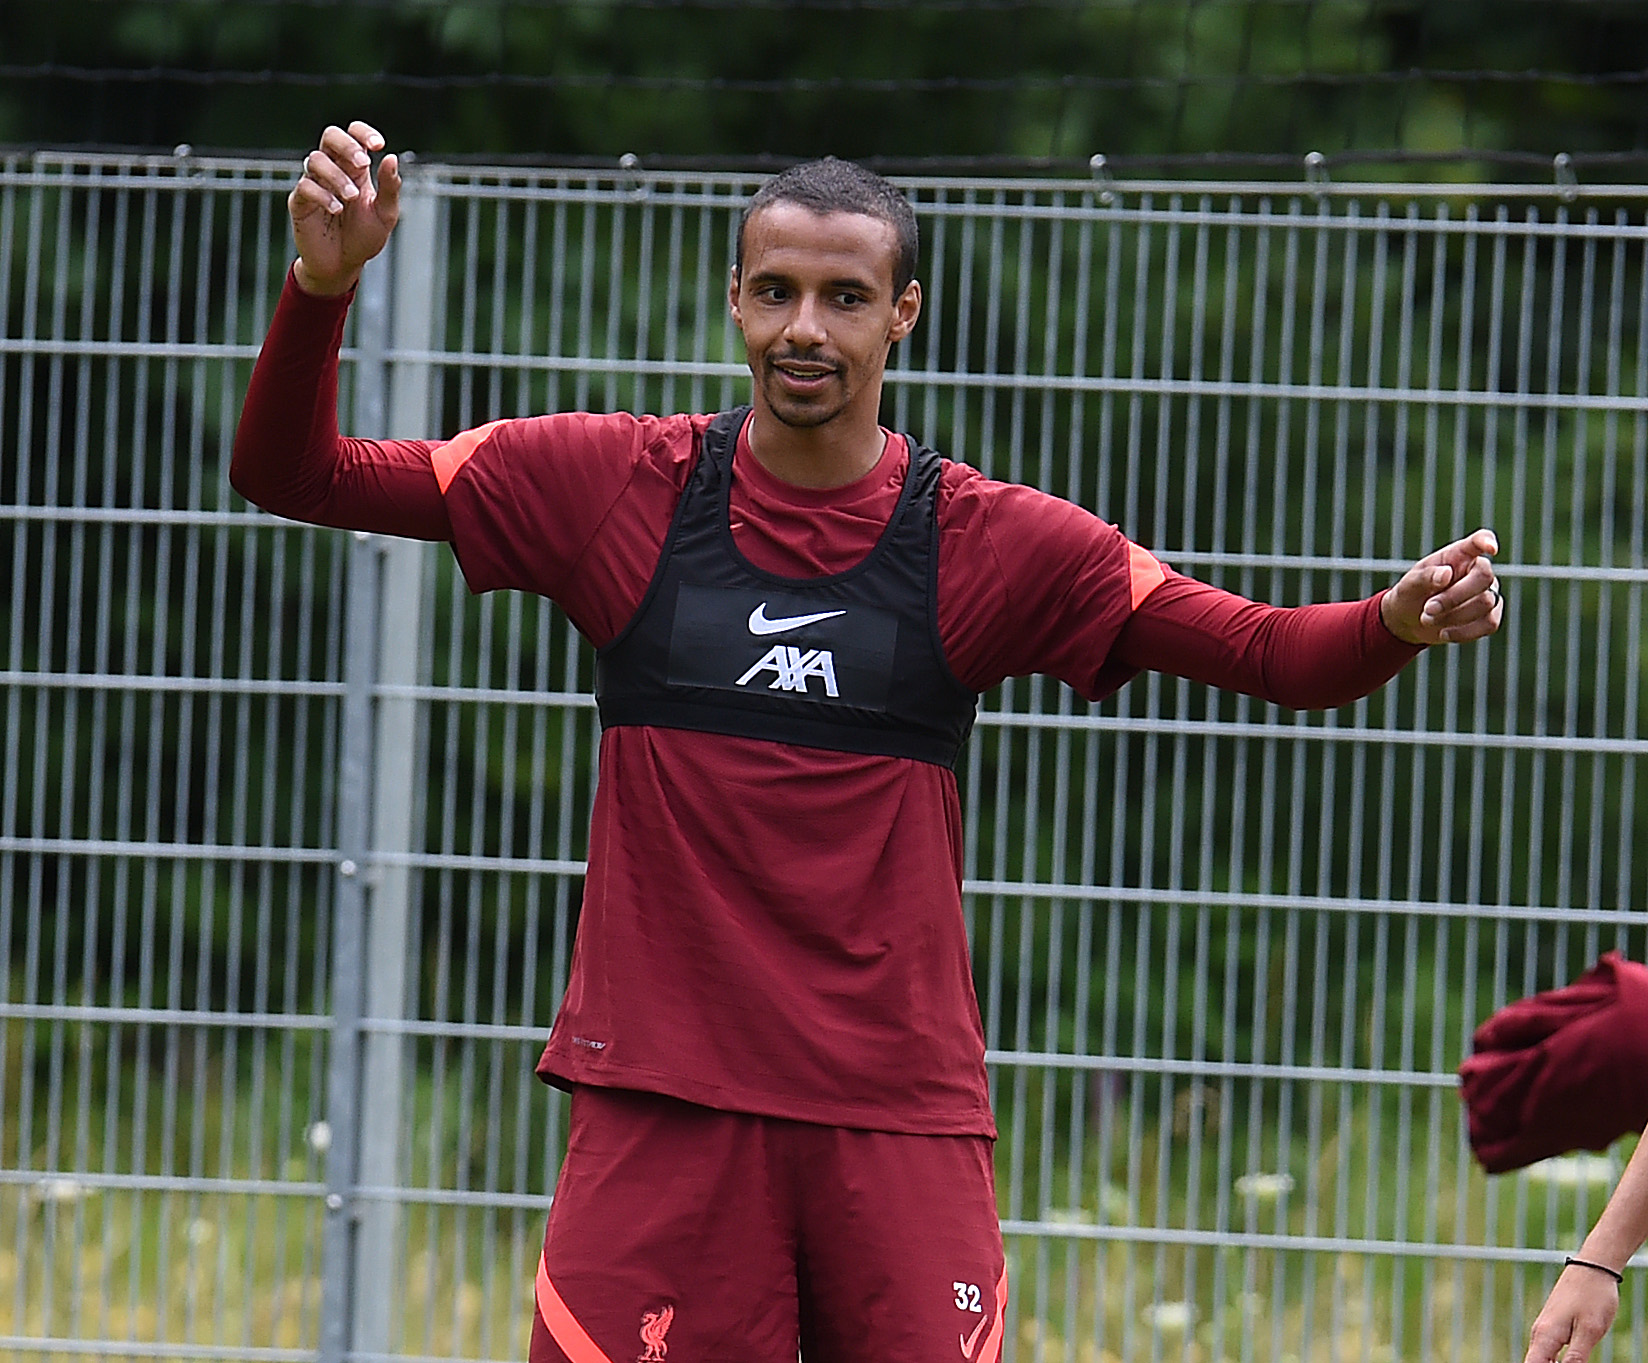 Joël Matip of Liverpool during a training session on July 15, 2021 in Austria.